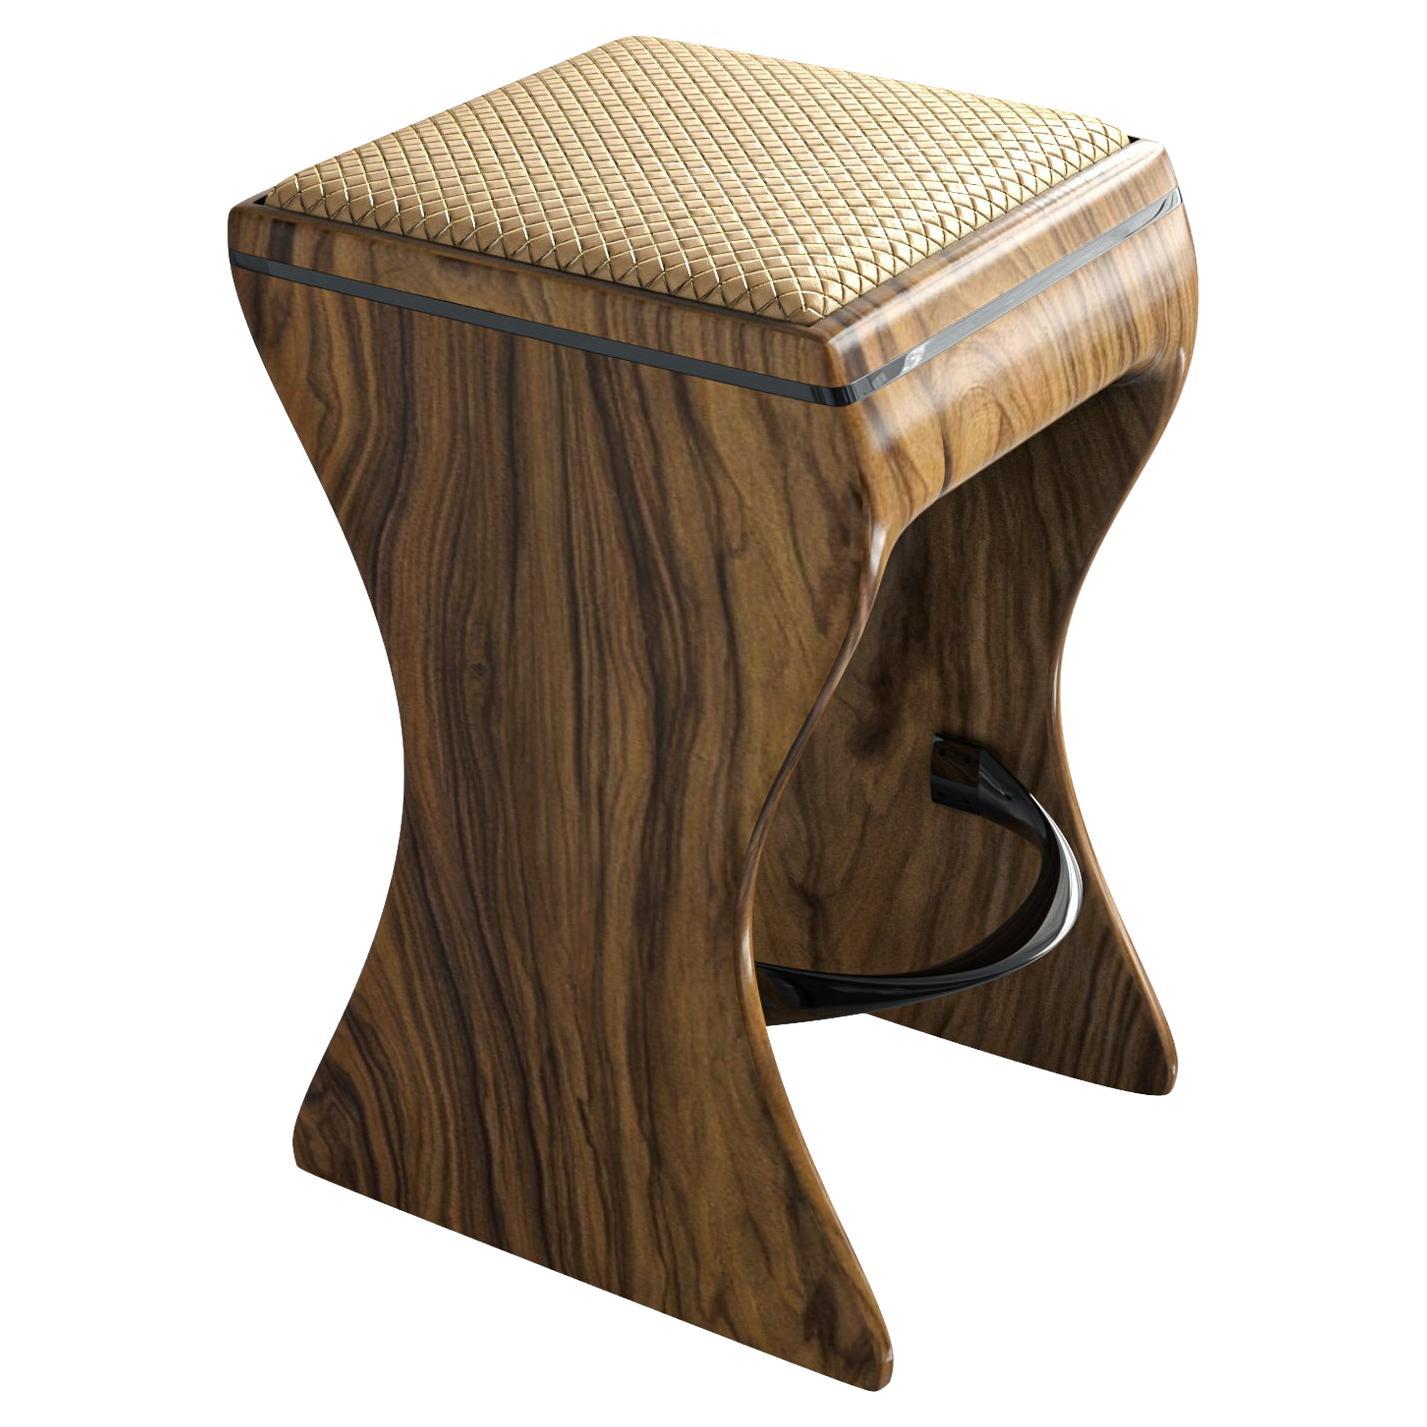 "Utopia" Bar Stool with Walnut and Steel Details, Hand Crafted, Istanbul